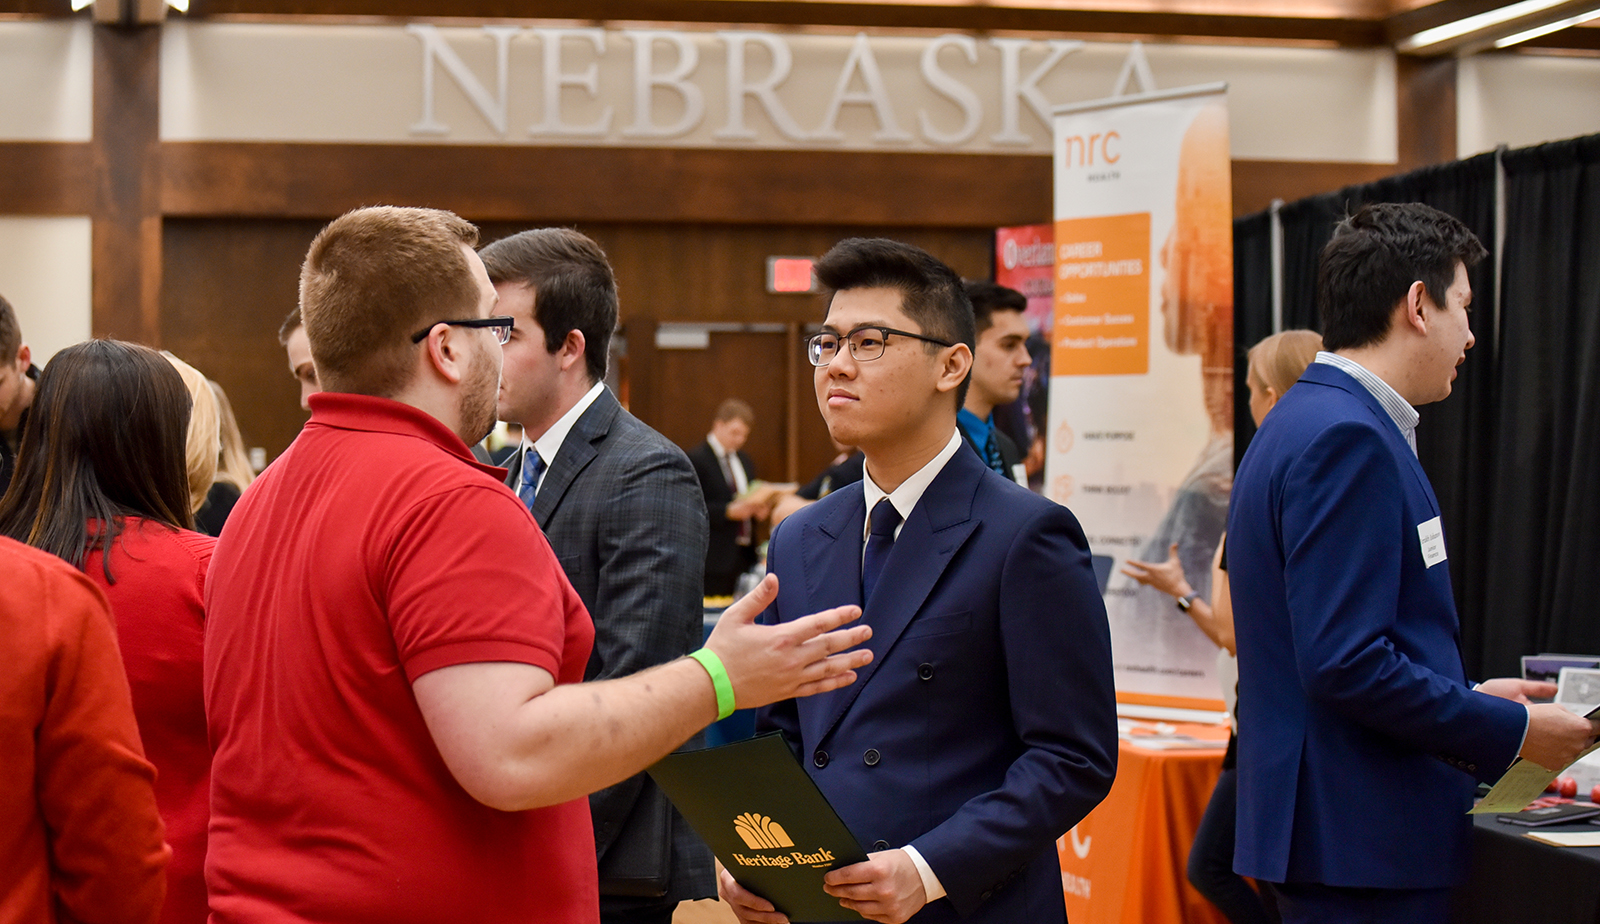 A girl participating in the UNL career fair